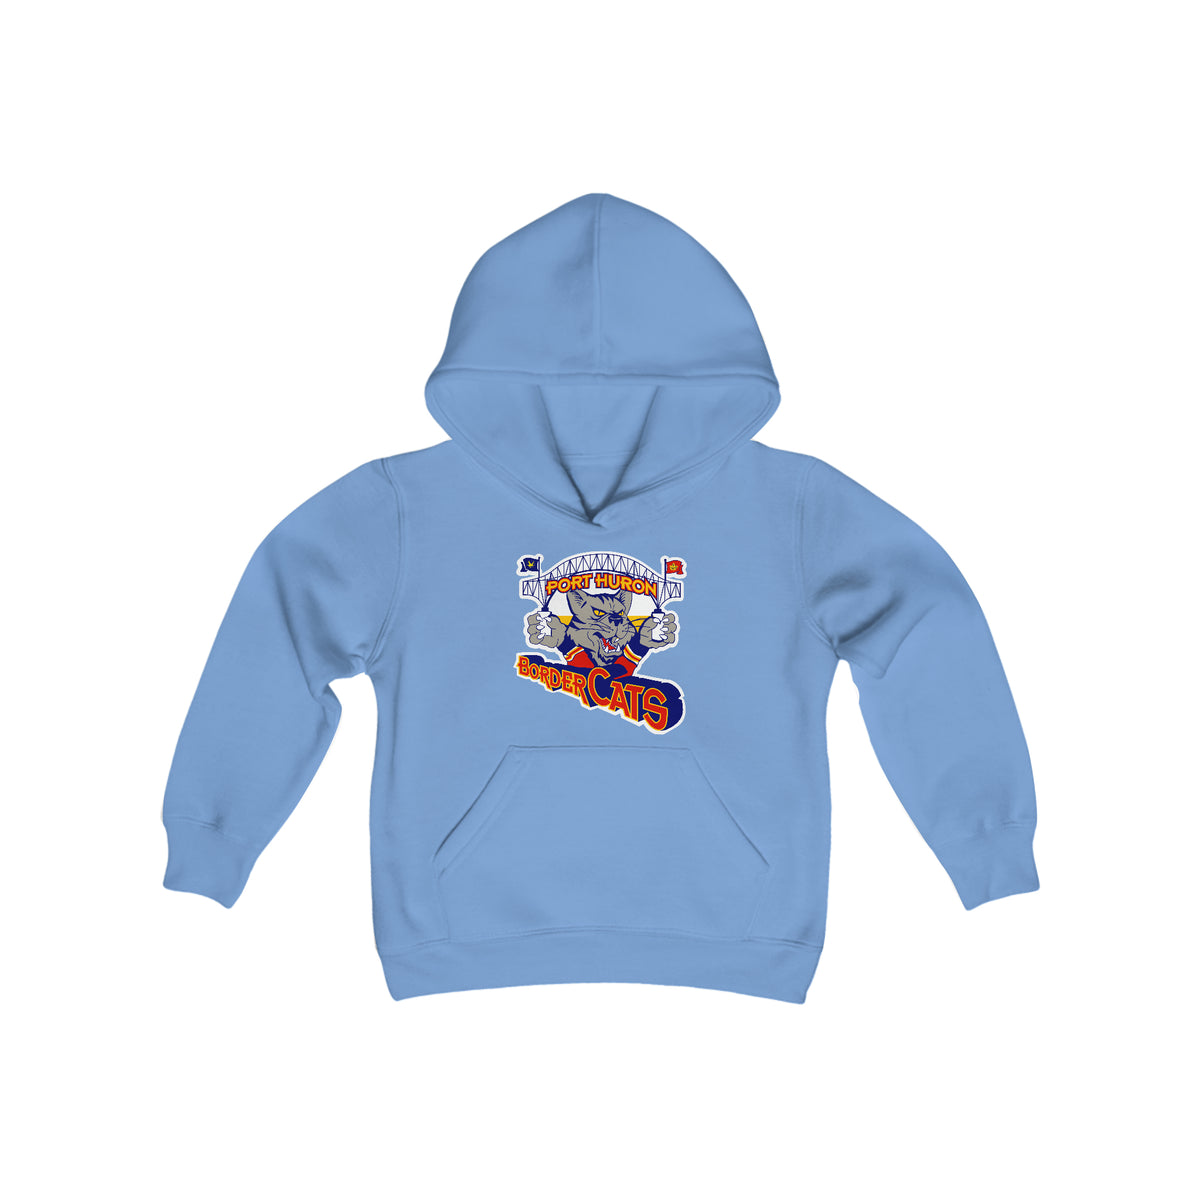 Port Huron Border Cats Hoodie (Youth) – Vintage Ice Hockey